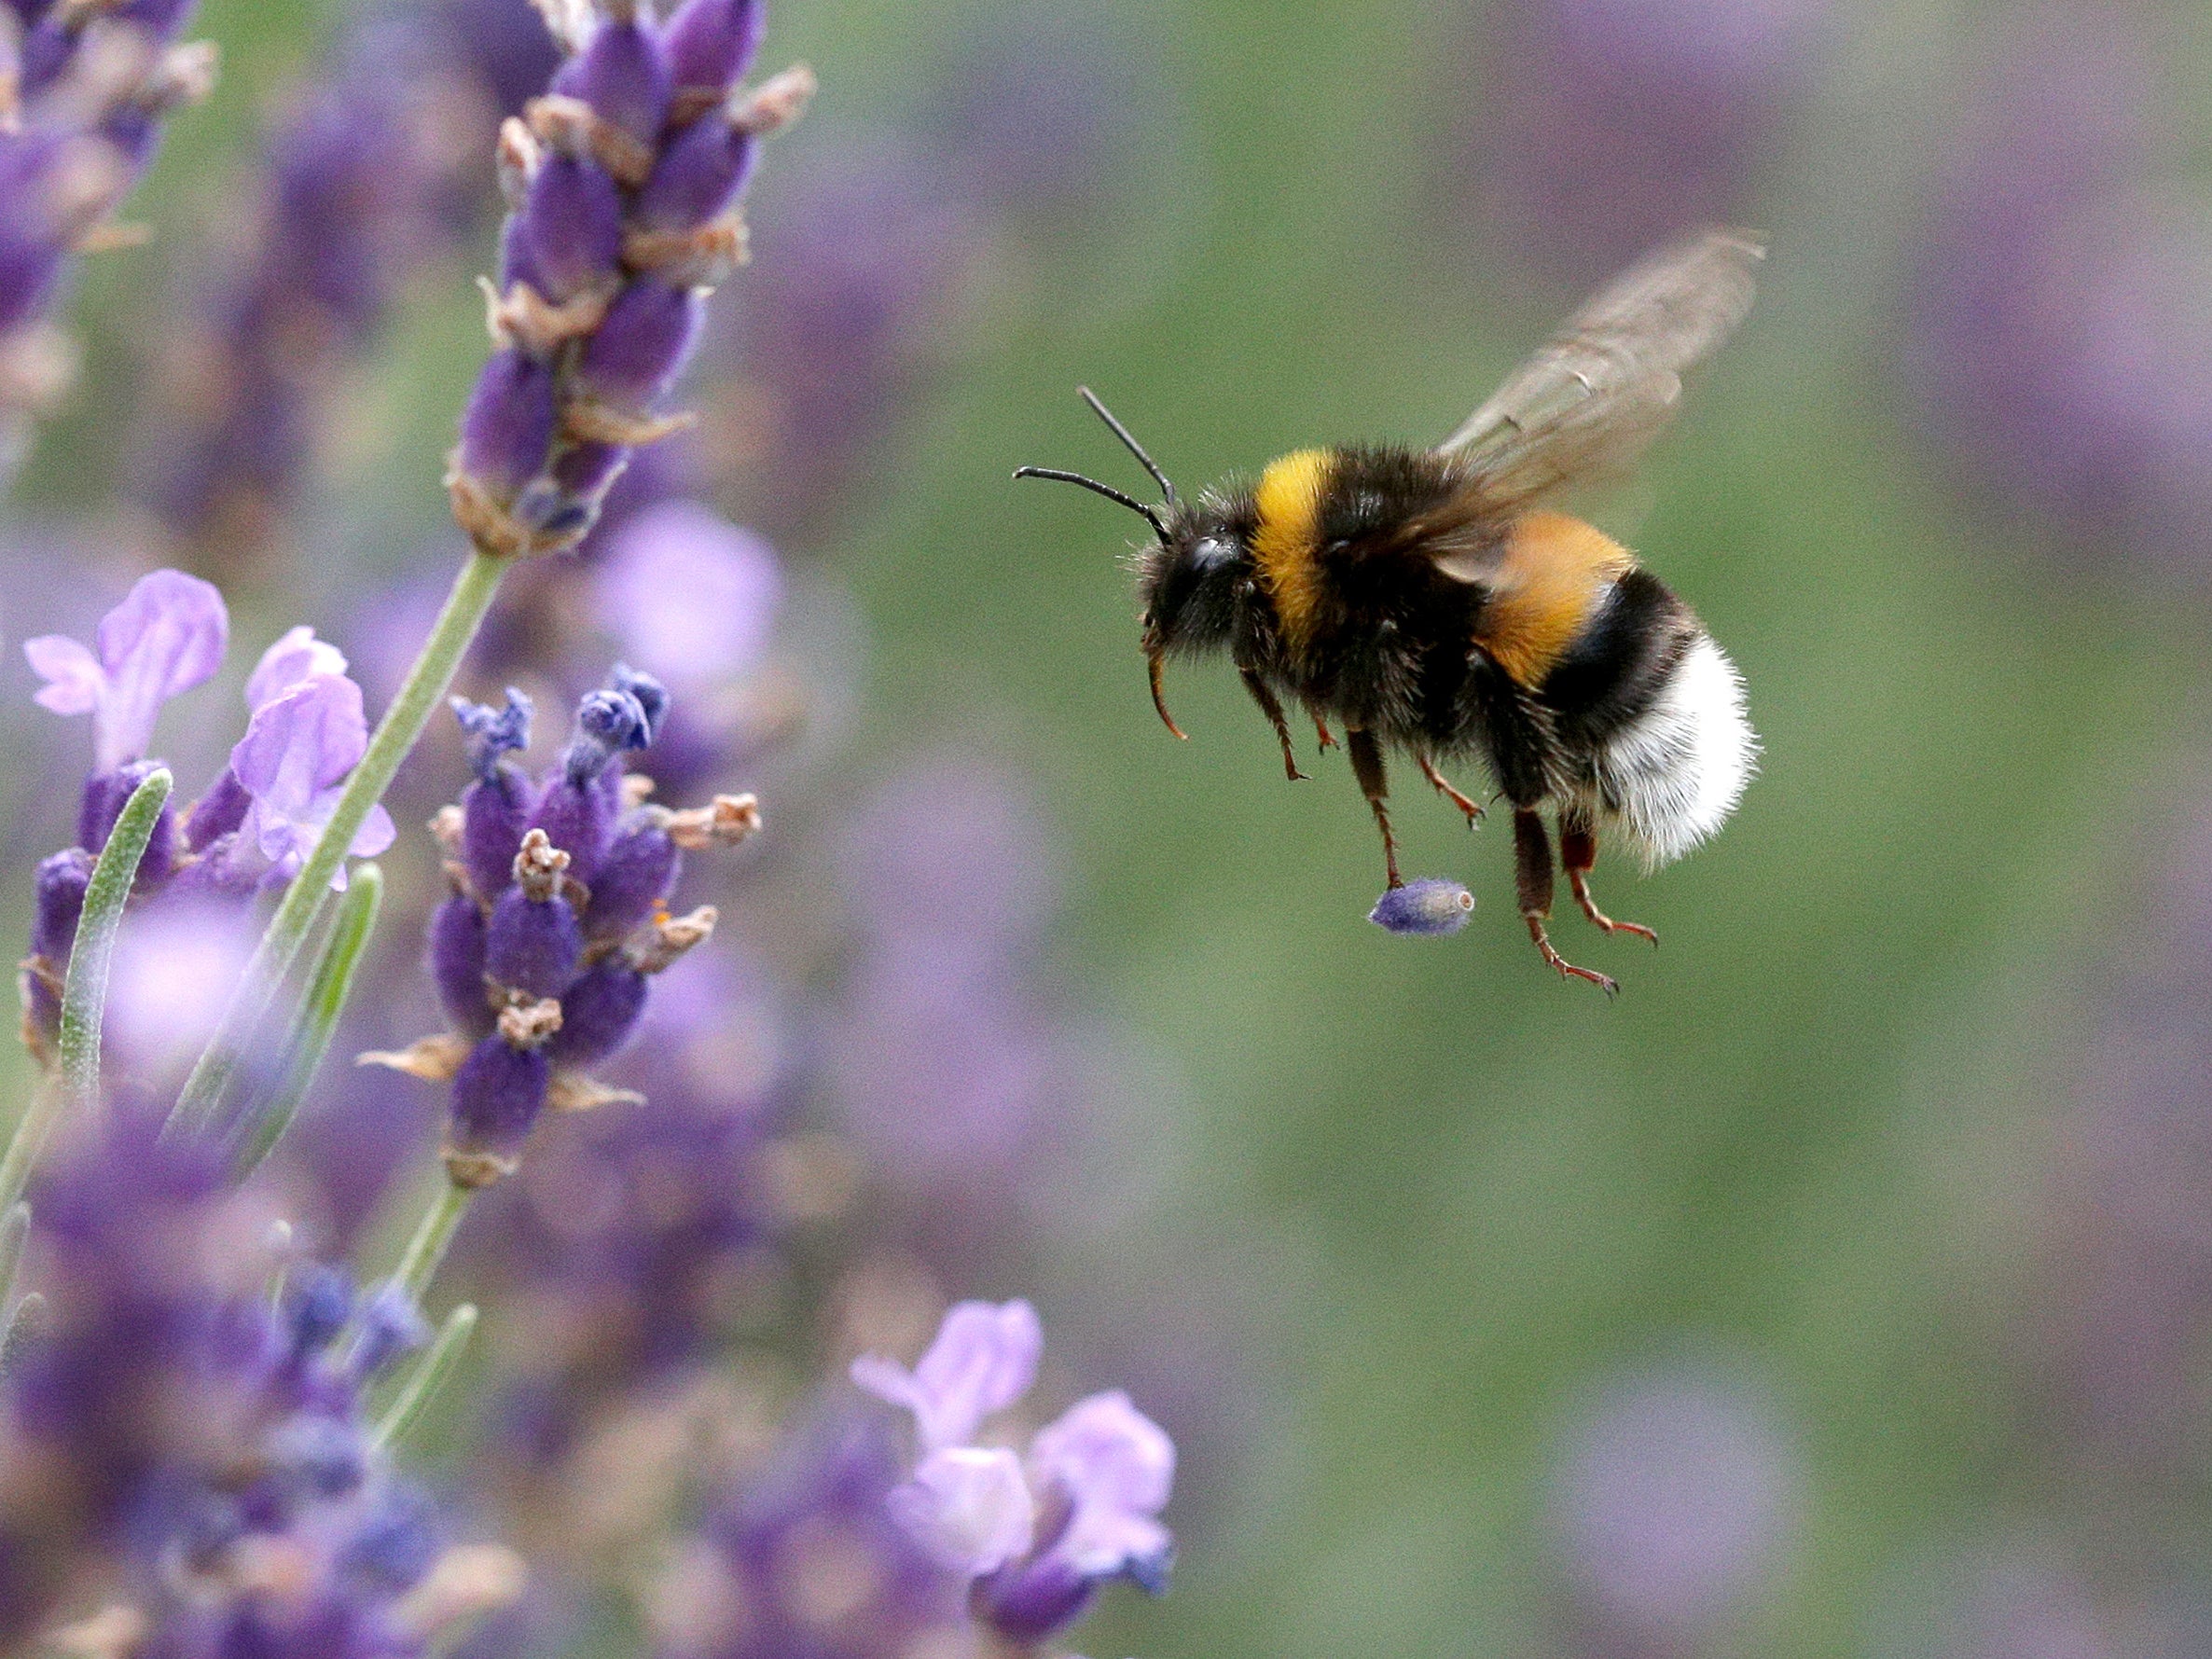 Bumblebees appear to be thriving in urban environments, according to new research